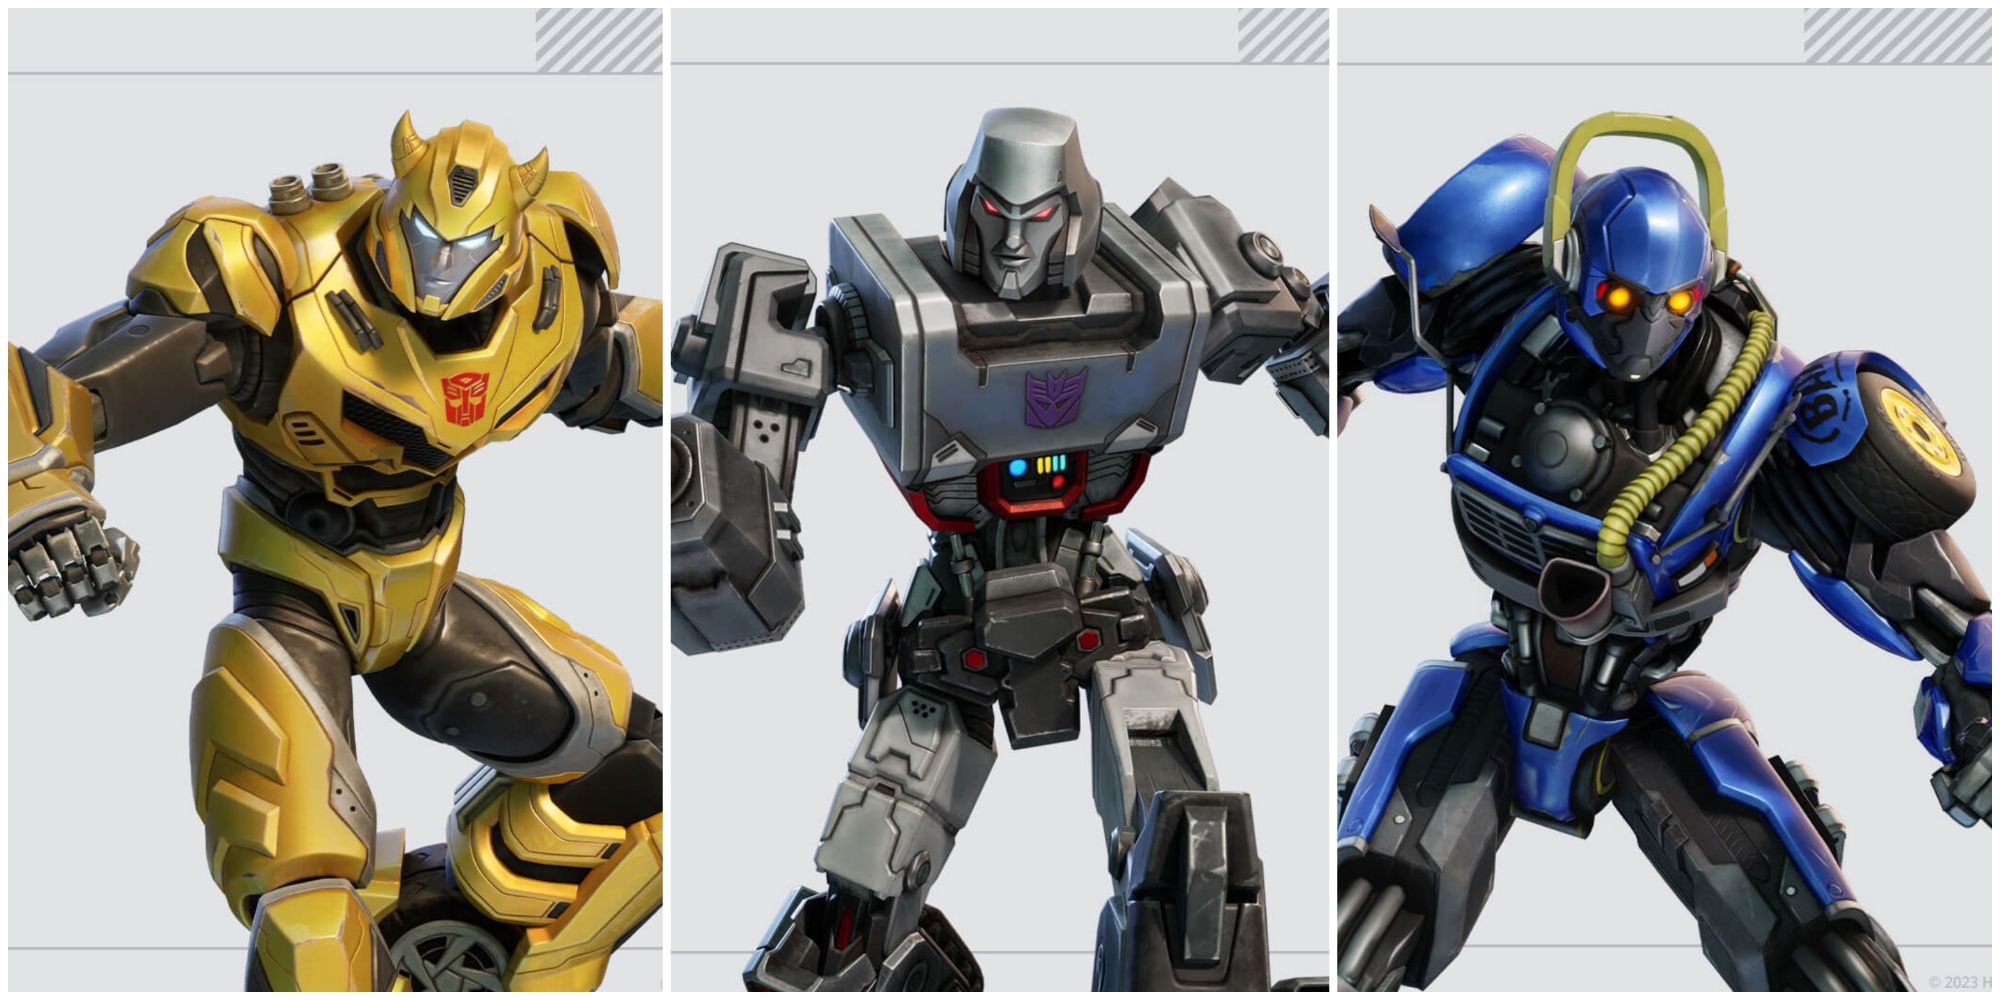 skins included in the transformers pack bumblebee, megatron, battle bus